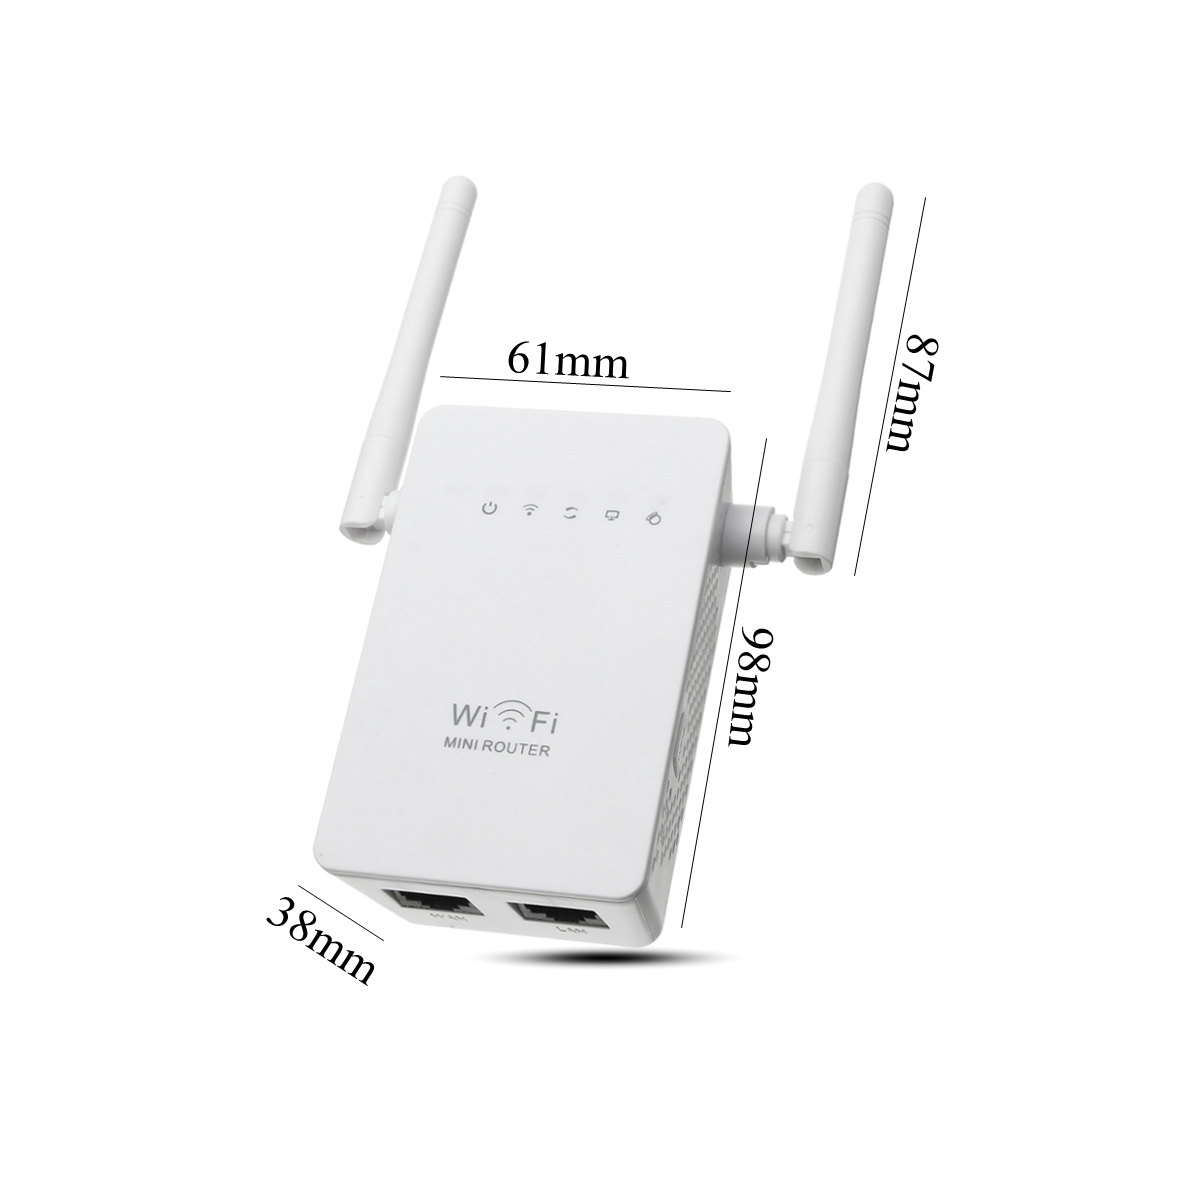 300Mbps-Wireless-Wifi-Range-Repeater-Booster-80211-Dual-Antennas-Wireless-AP-Router-with-LAN-WAN-Por-1257437-10